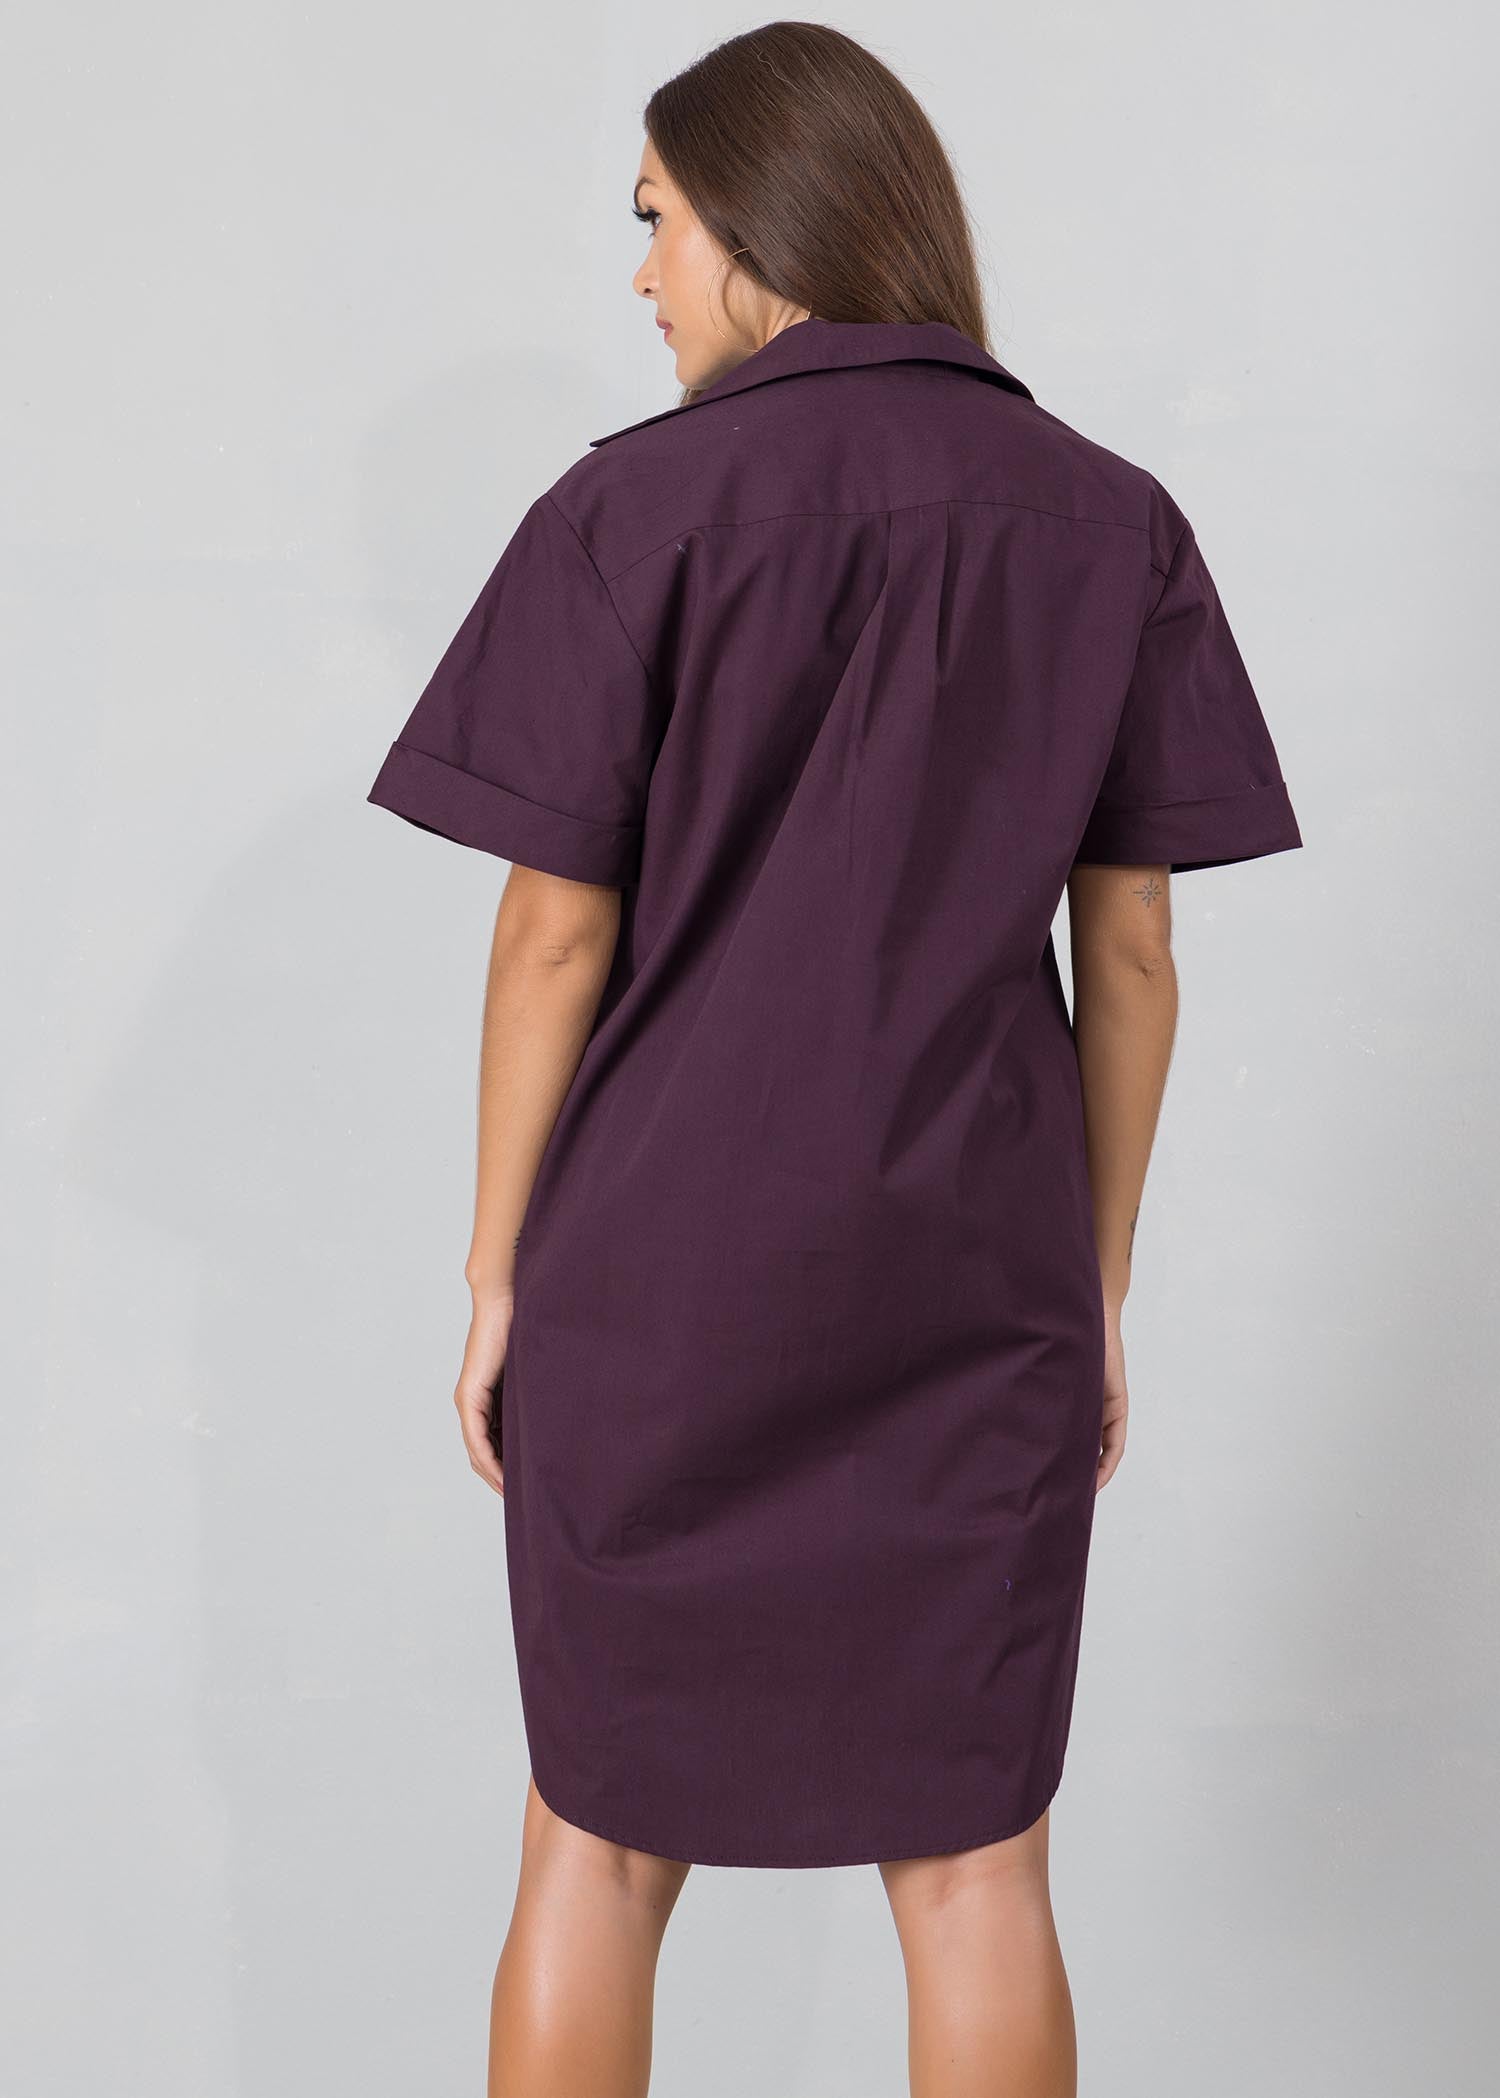 Shirt dress with large pockets